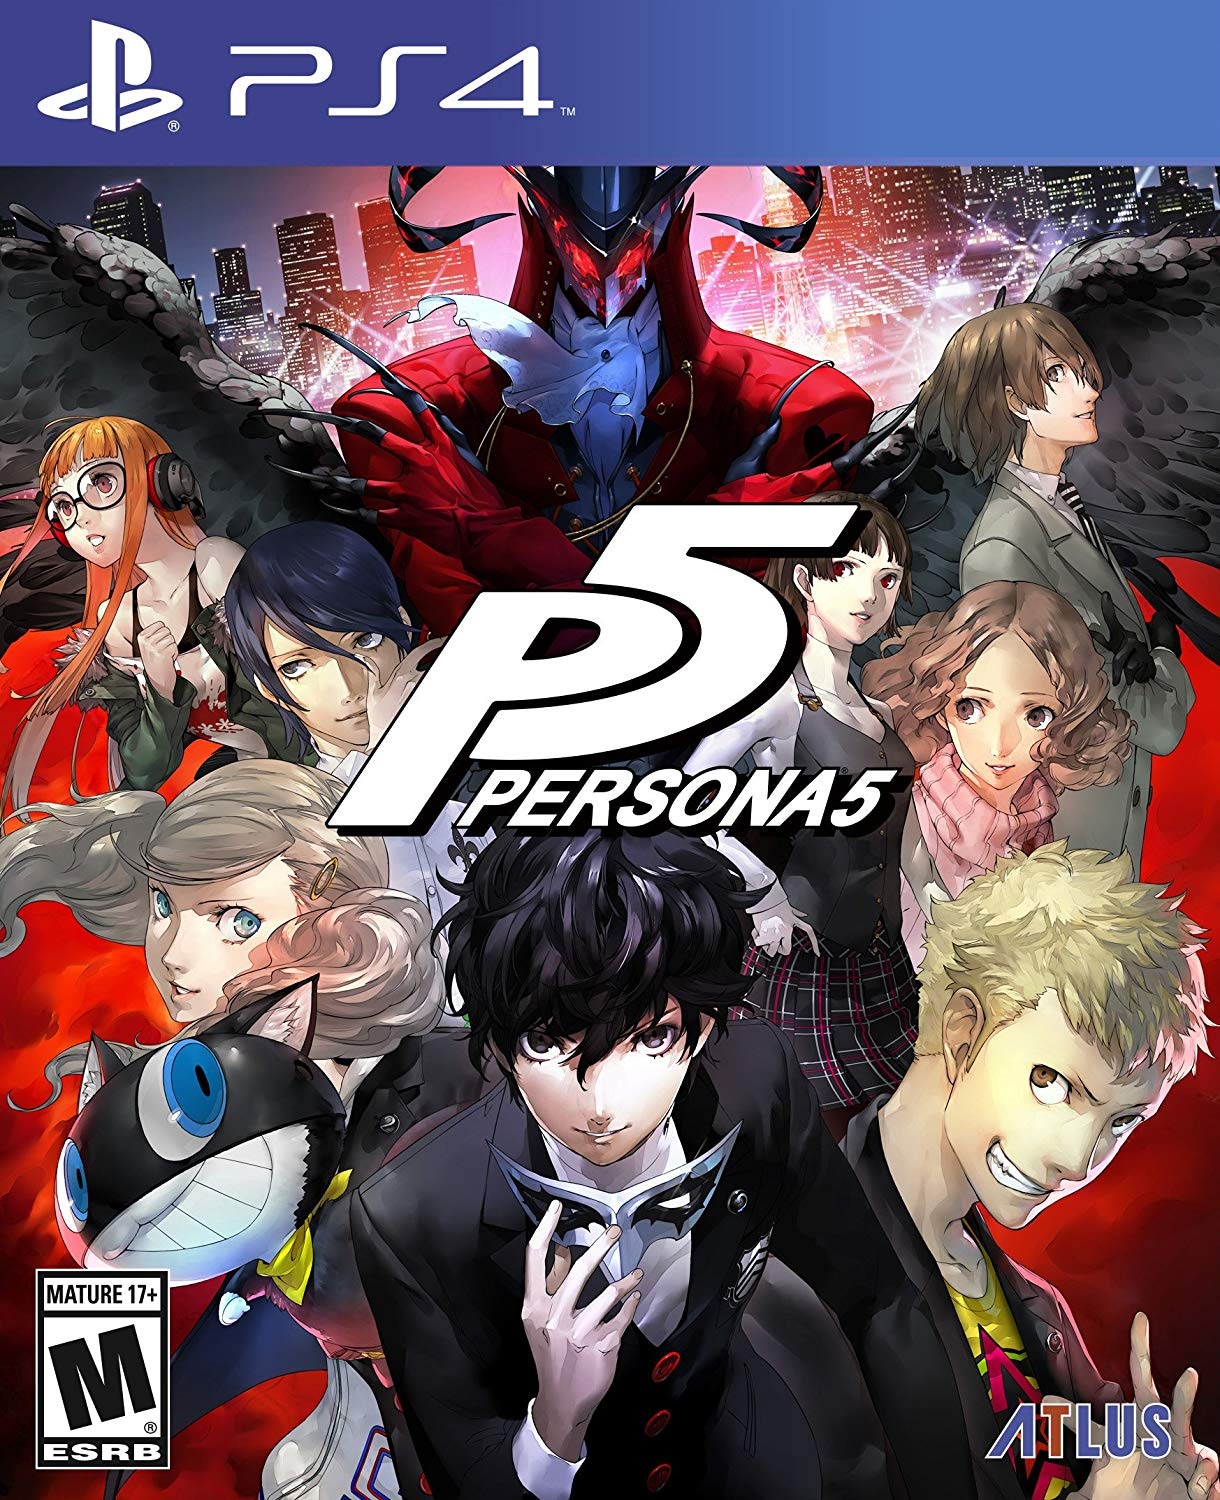 PS4 Persona 5 (R1 ENG) Physical - 1